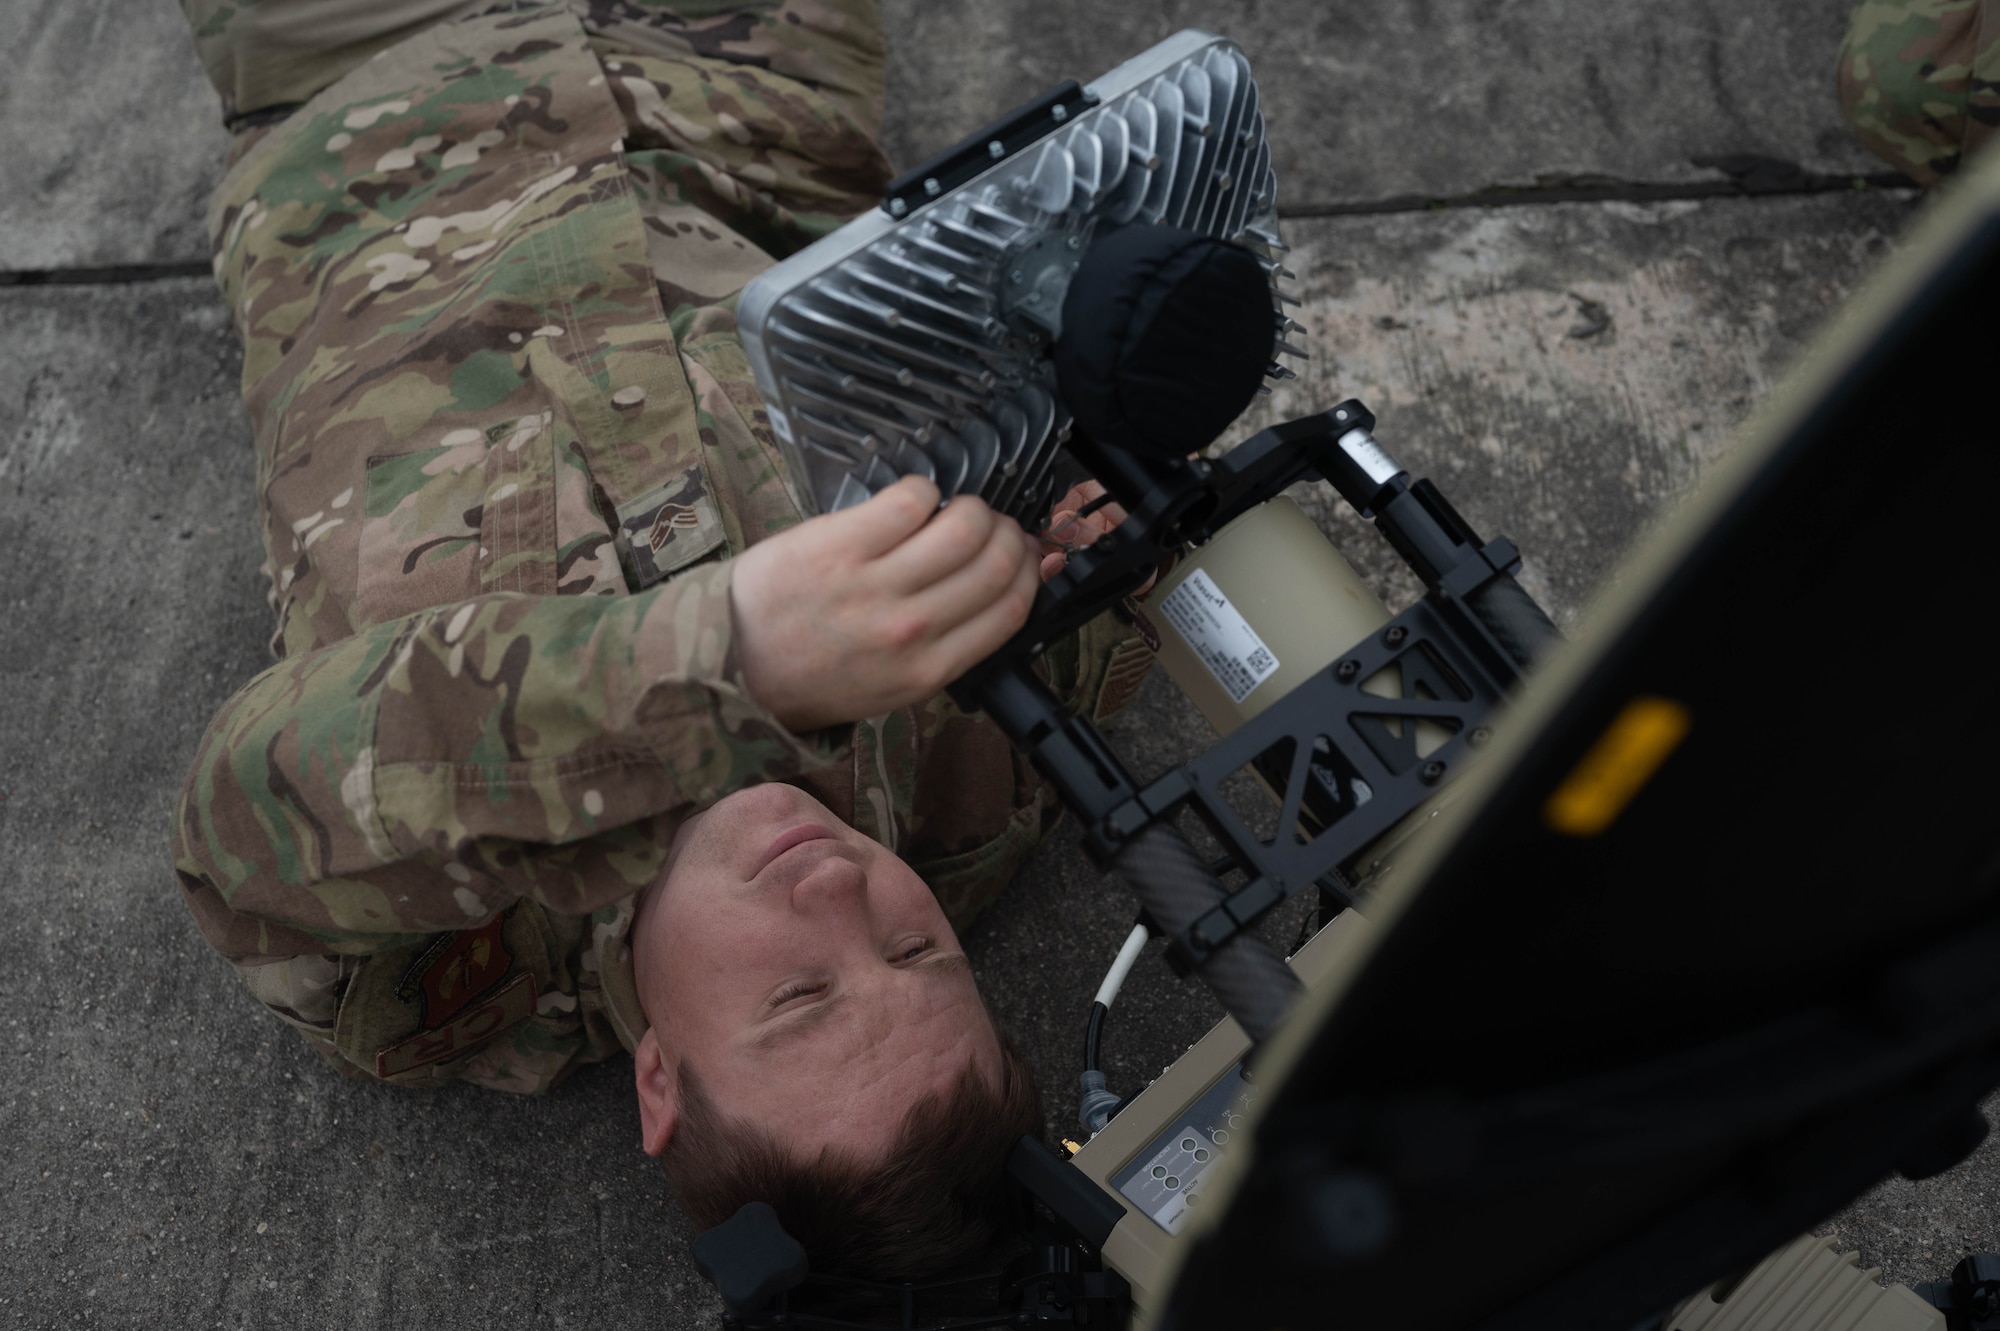 An Airman works on communications systems.